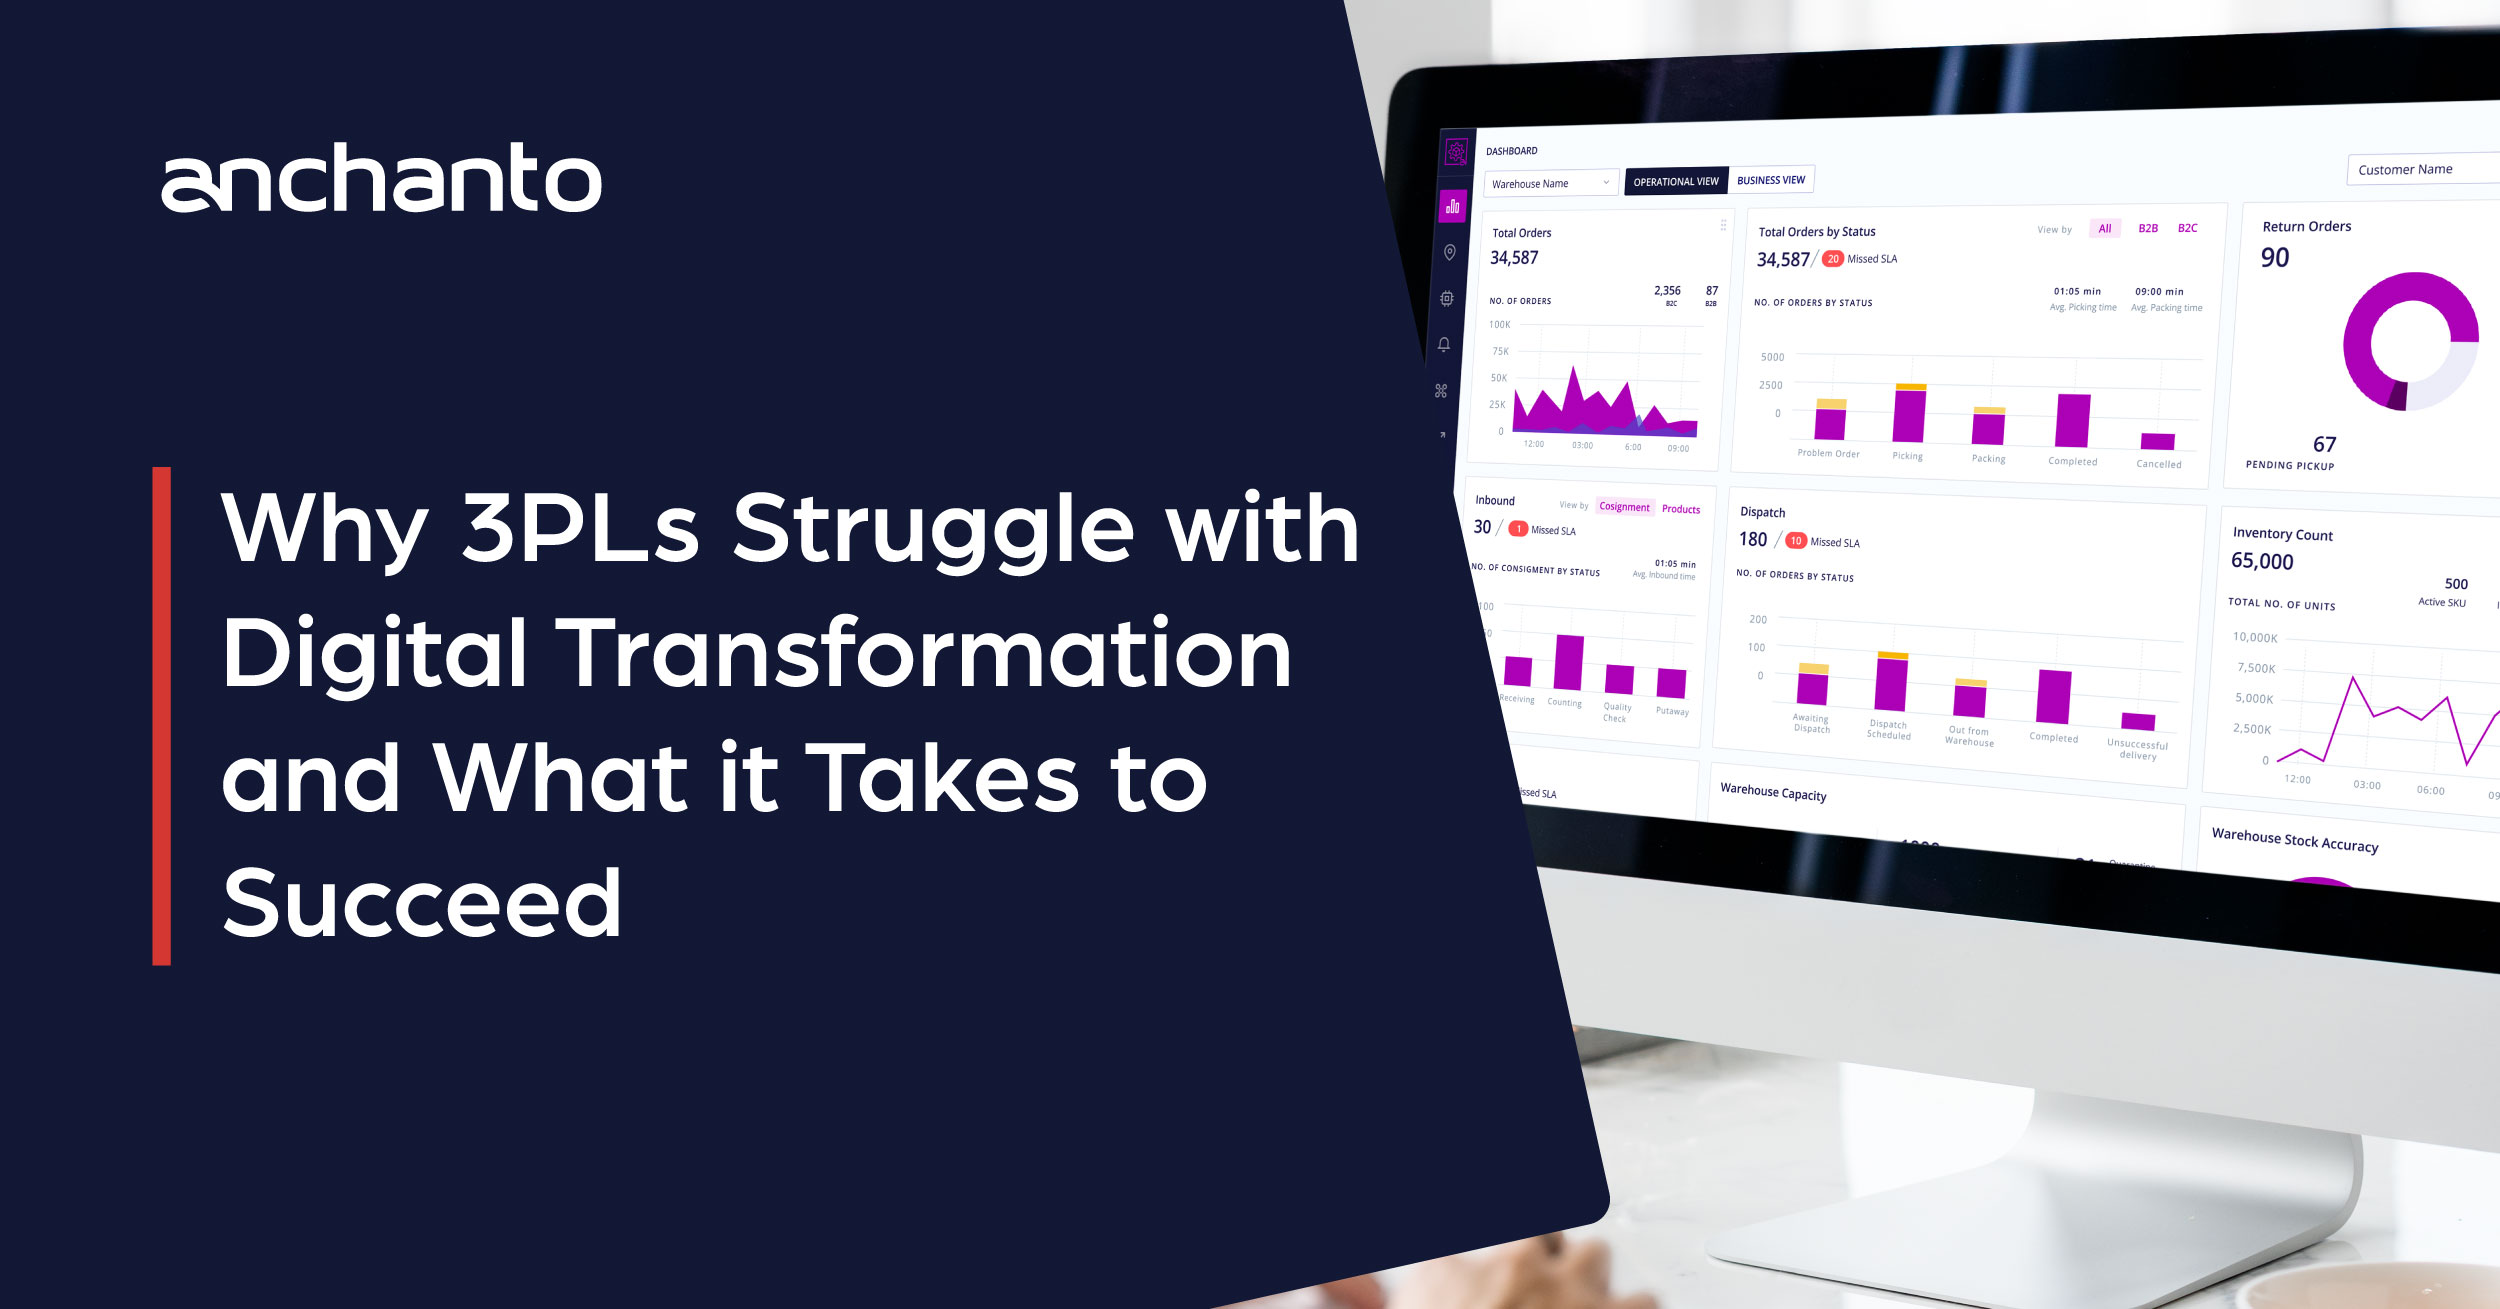 Why 3PLs Struggle with Digital Transformation and What it Takes to Succeed